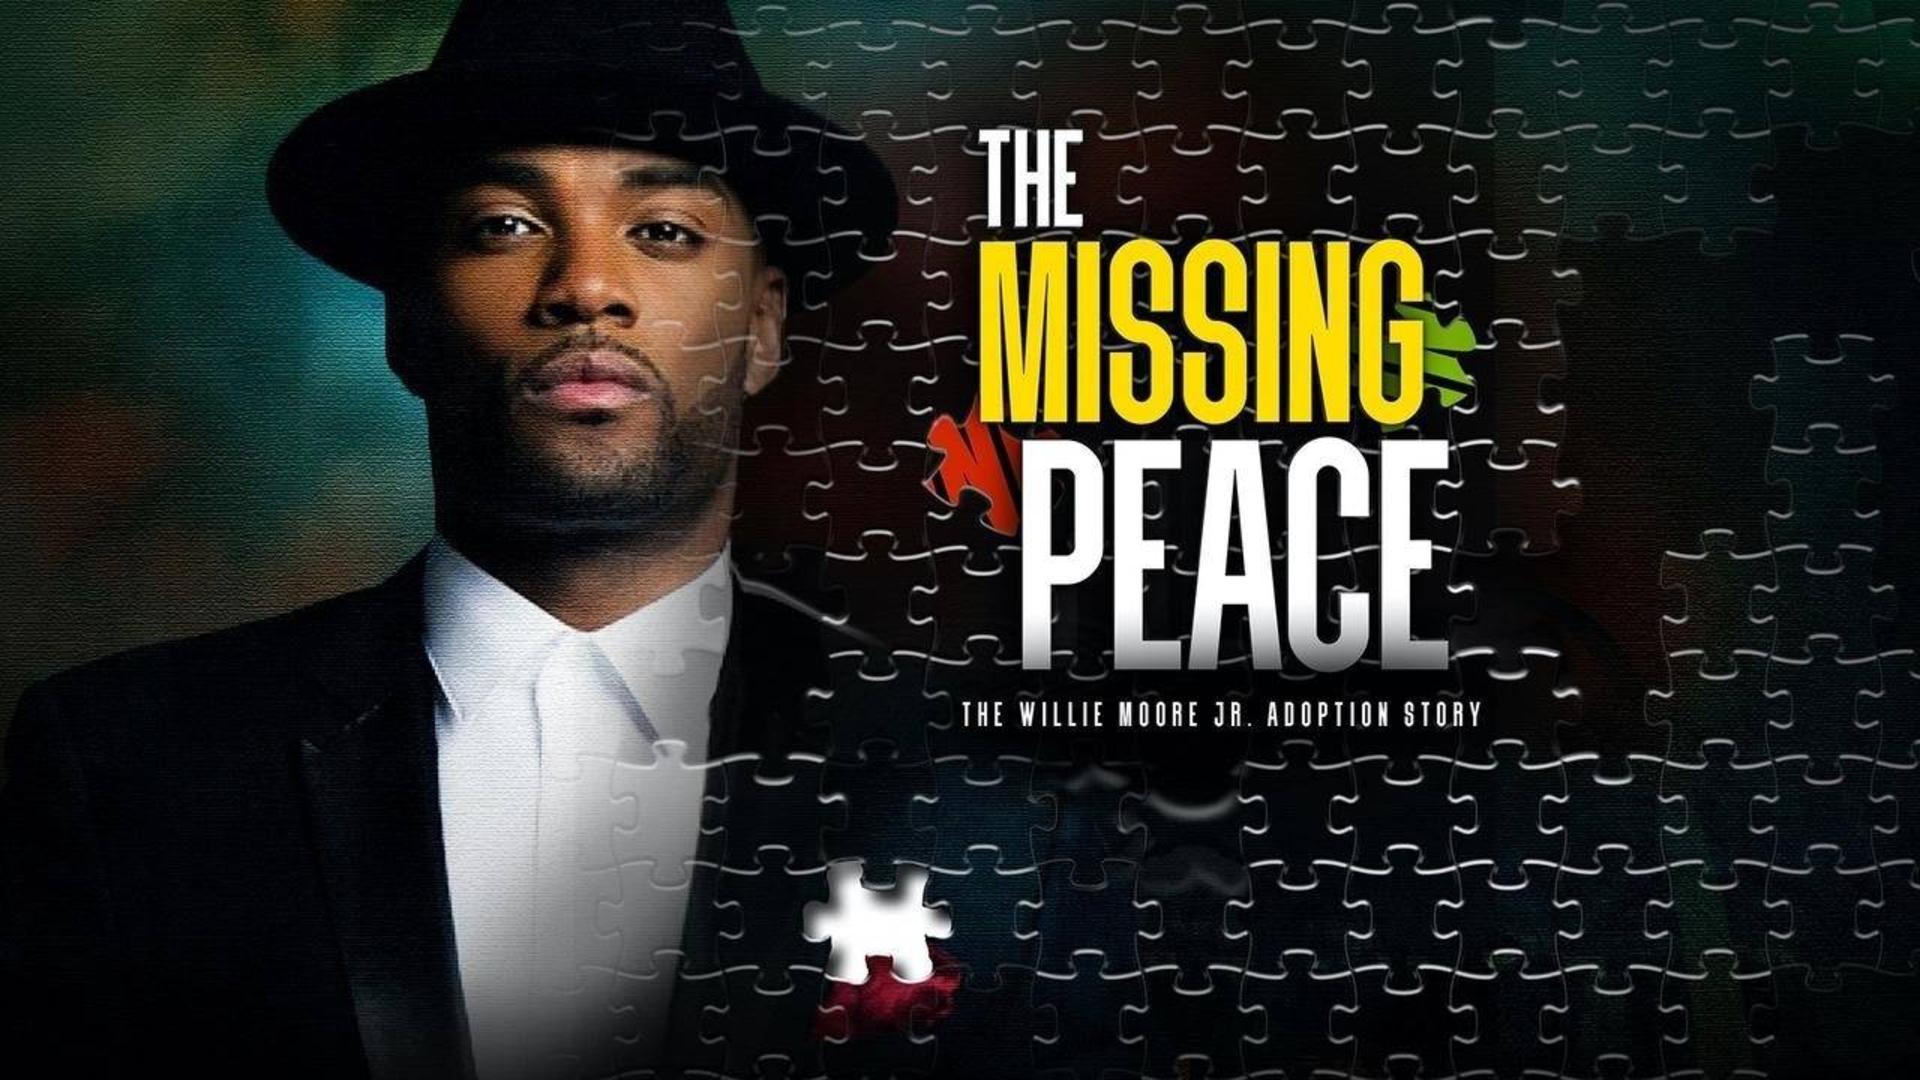 The Missing Peace: The Willie Moore Jr. Adoption Story